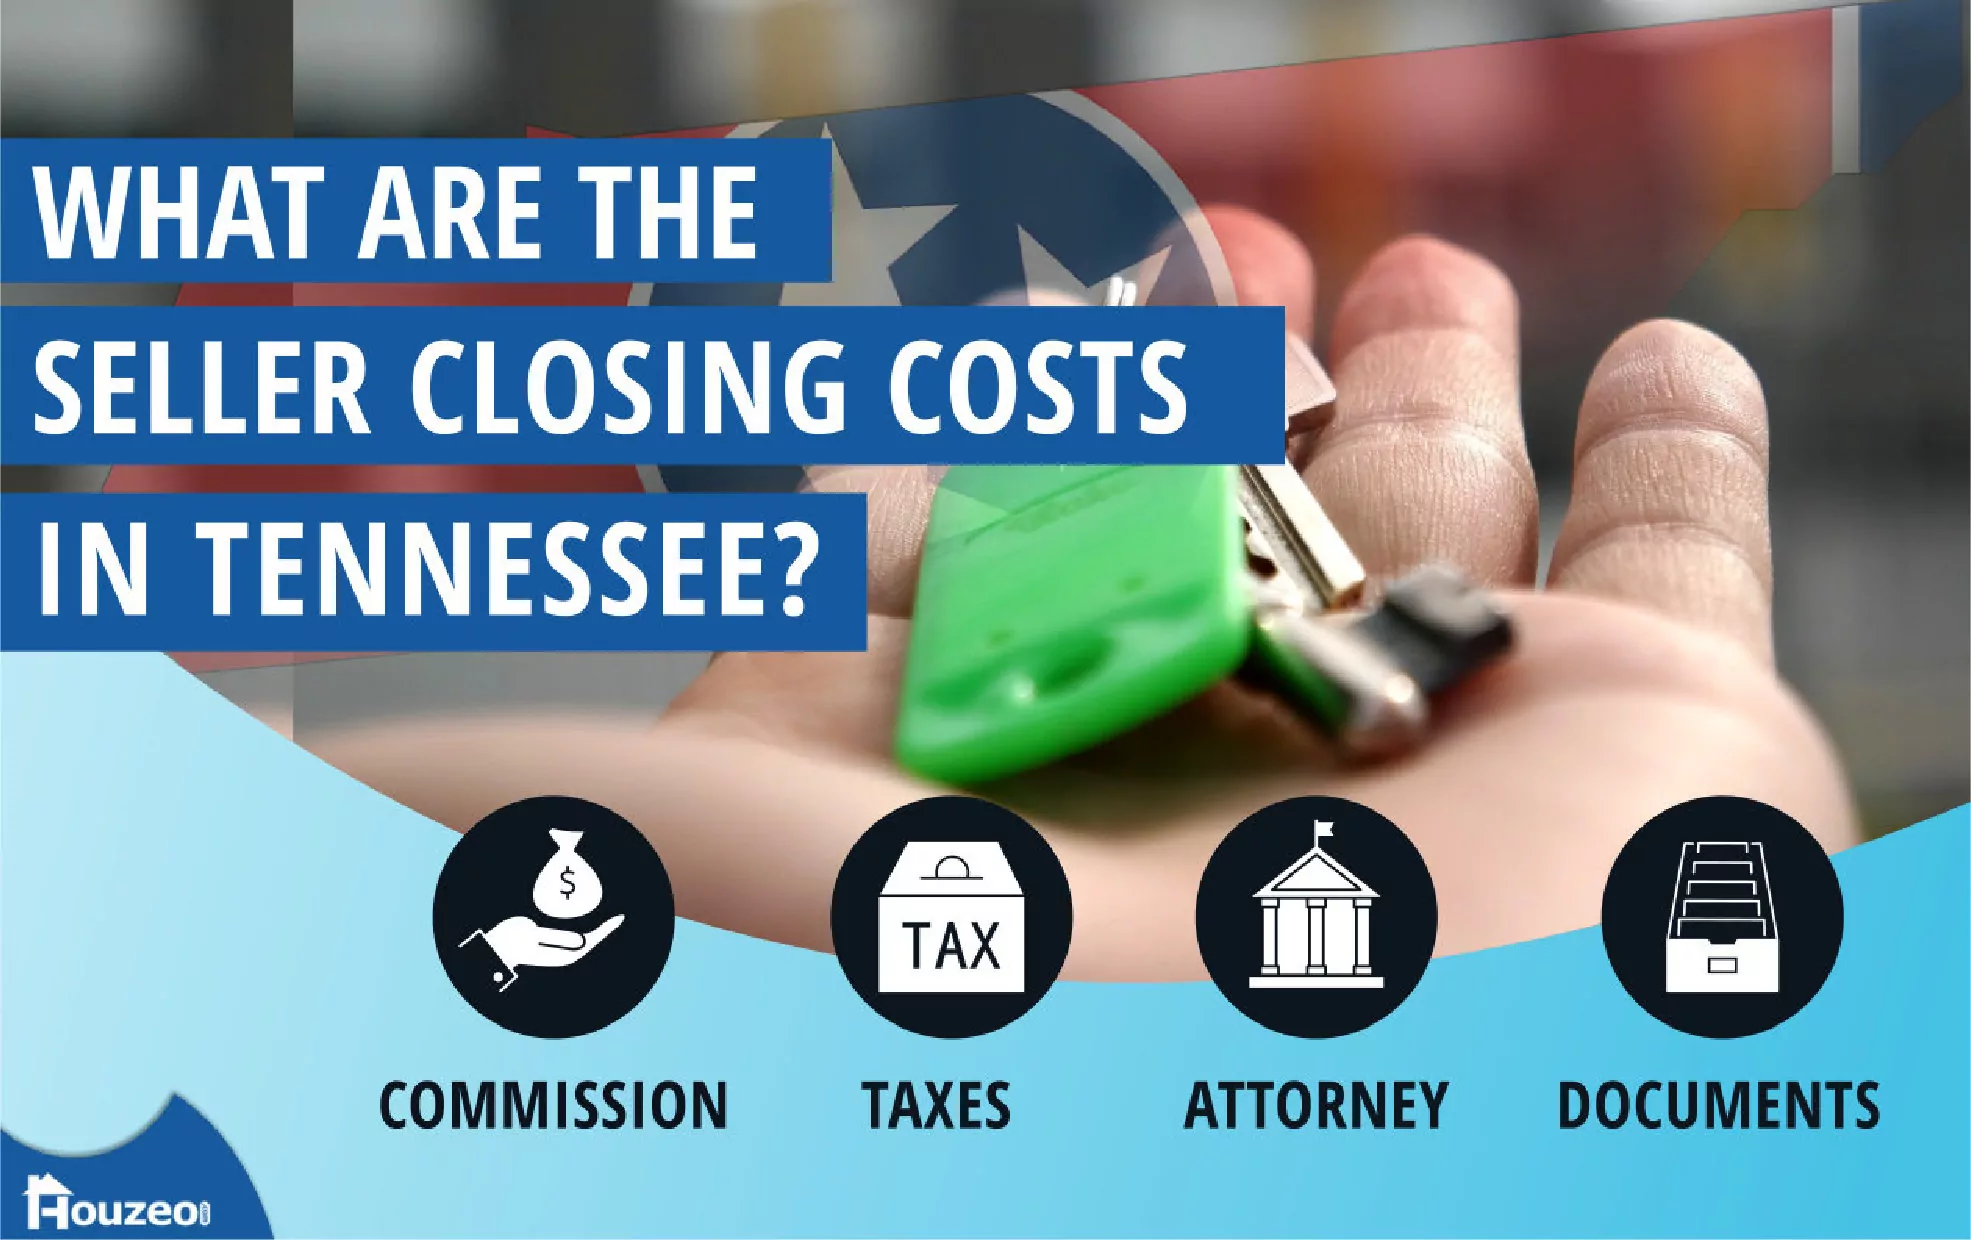 Thumbnail - What Are the Seller Closing Costs in Tennessee?